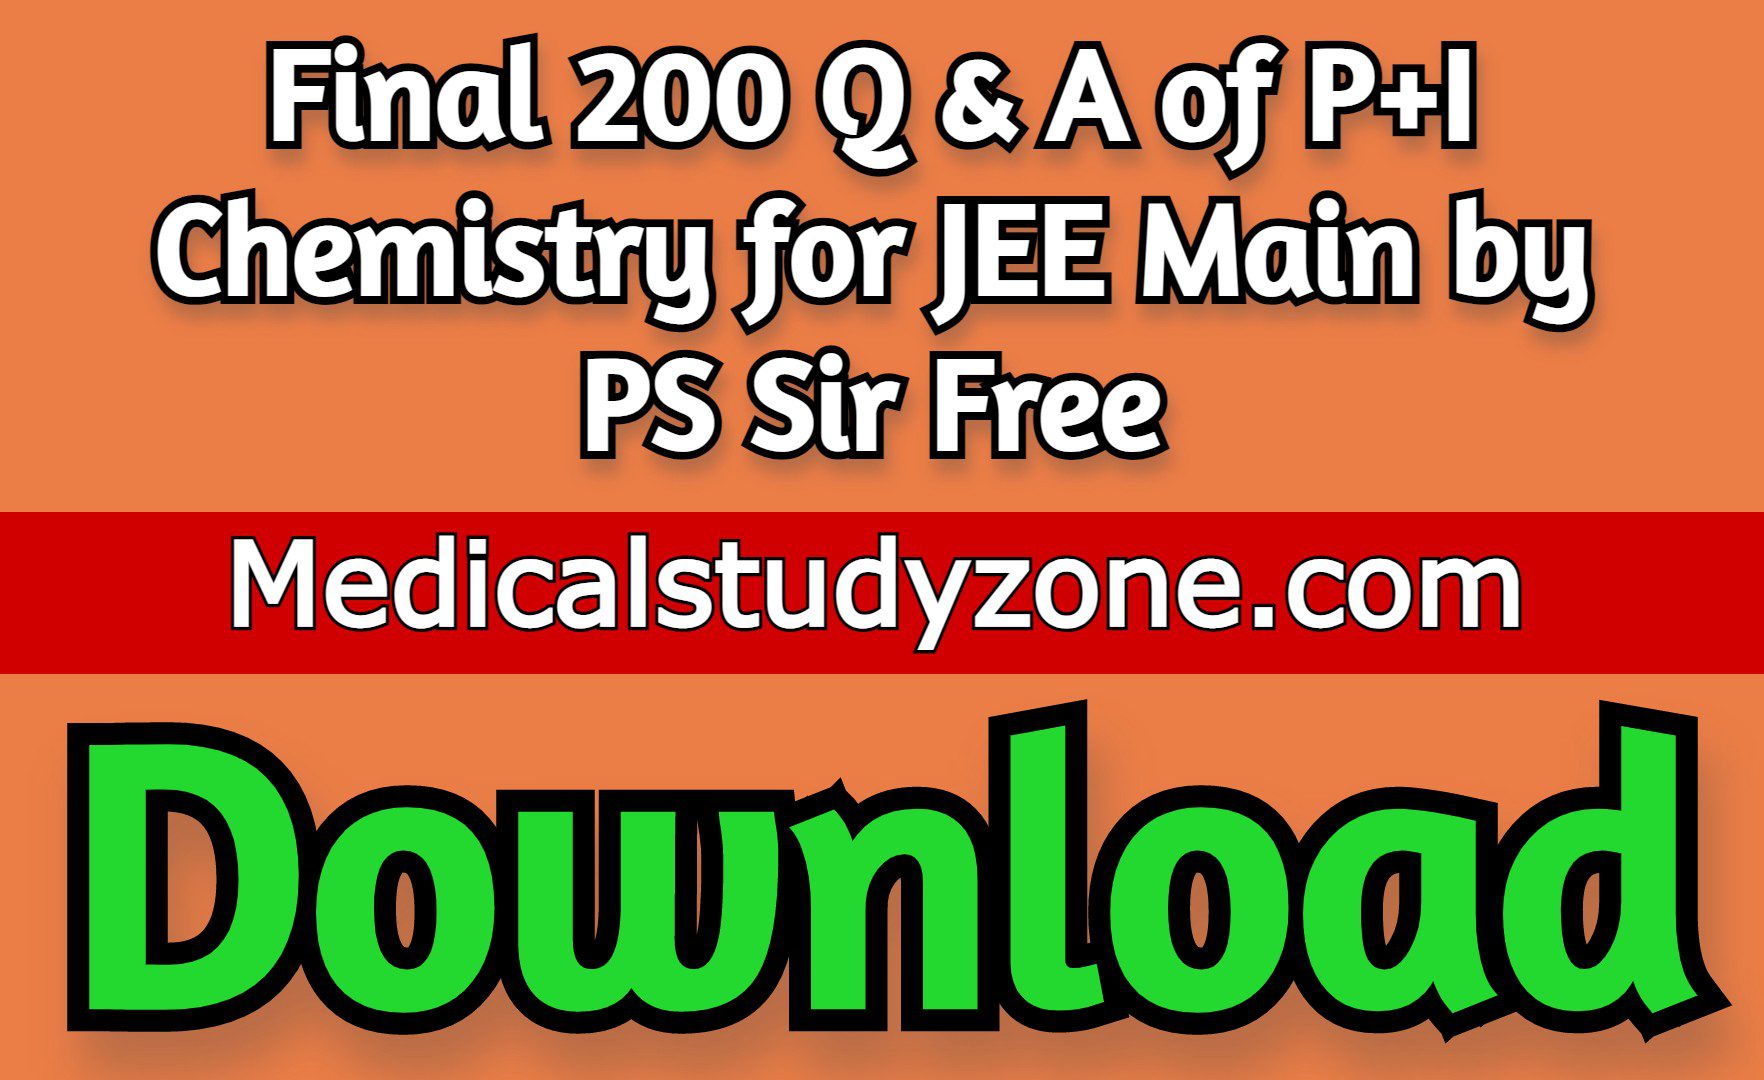 Download Final 200 Q & A of P+I Chemistry for JEE Main by PS Sir Free